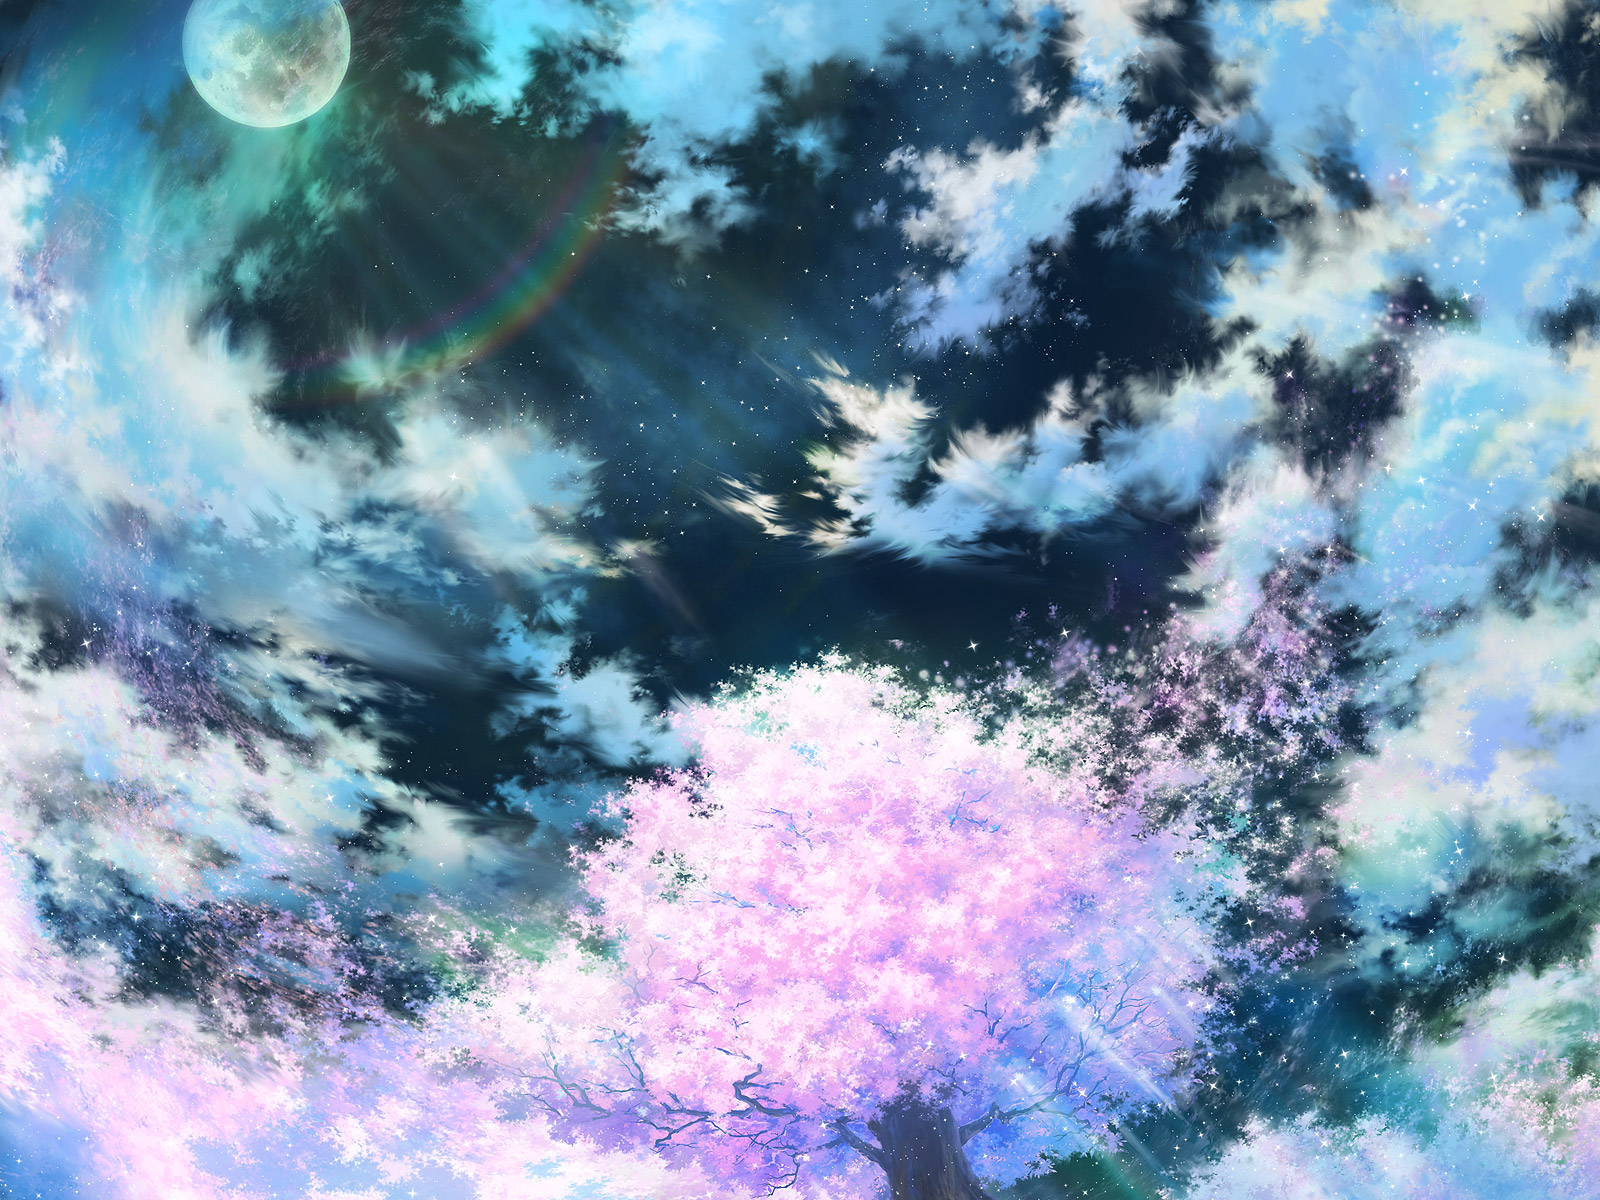 Anime-style night landscape with blossoming sakura tree under a moonlit sky